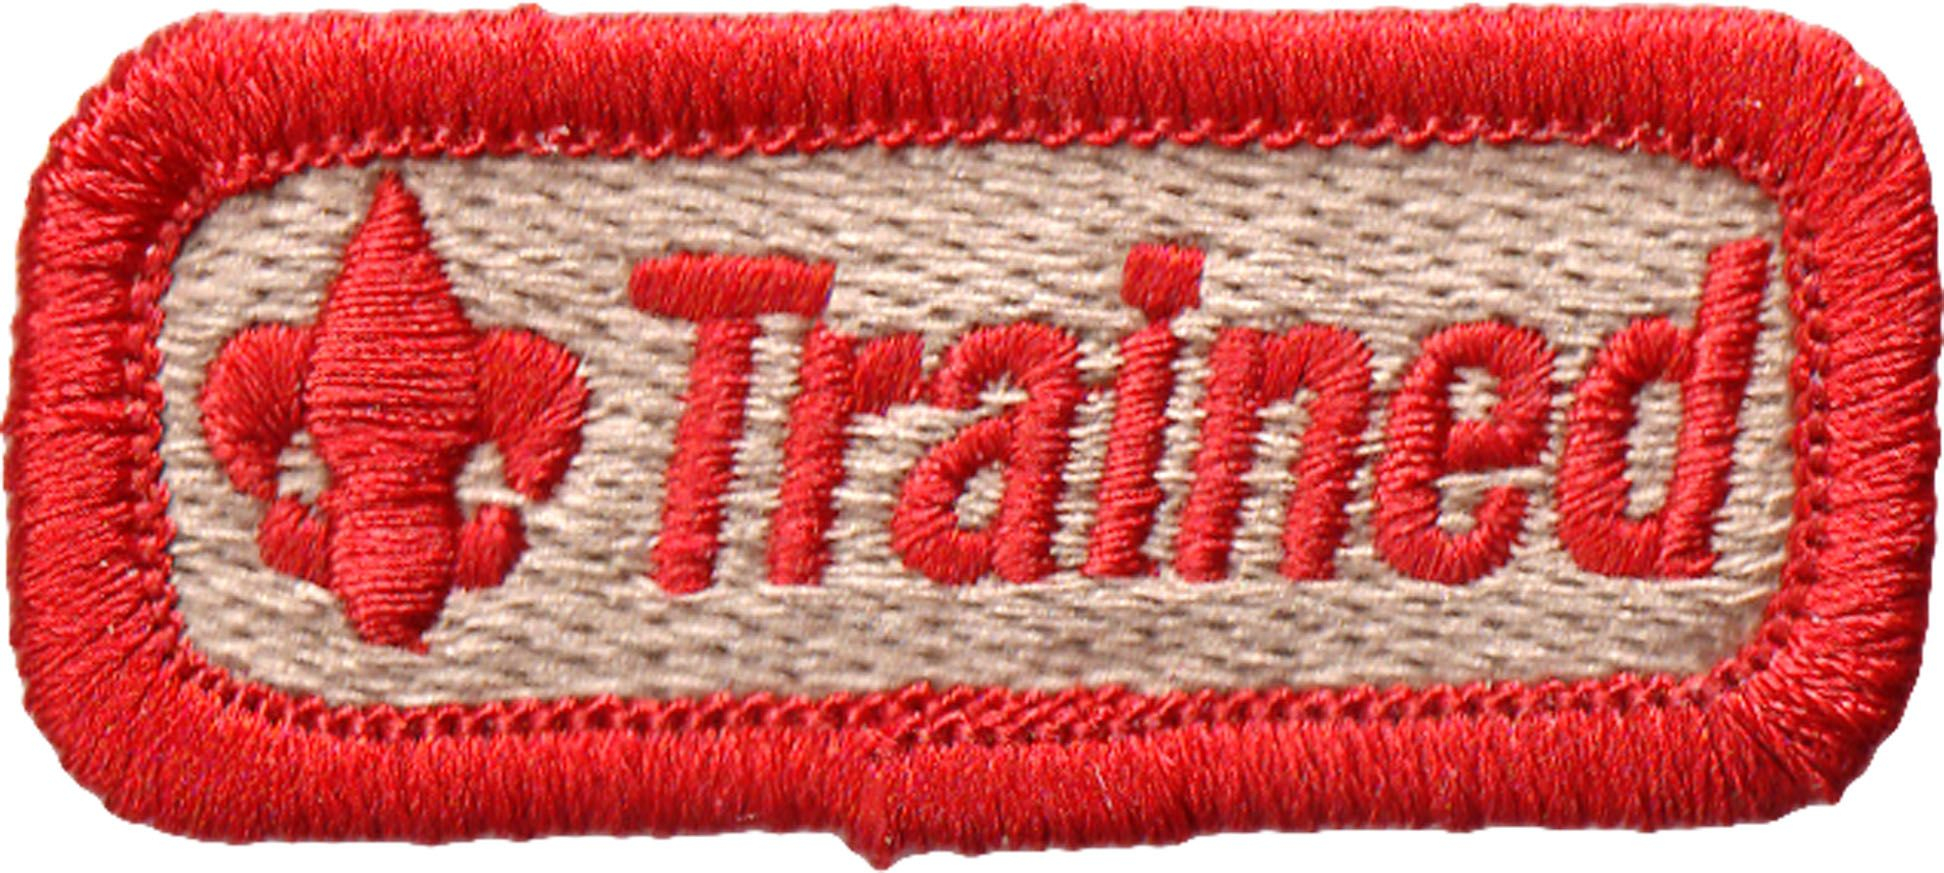 Red, Tan - Boy Cub Scouts OFFICIAL BSA "TRAINED" PATCH Embroidered 